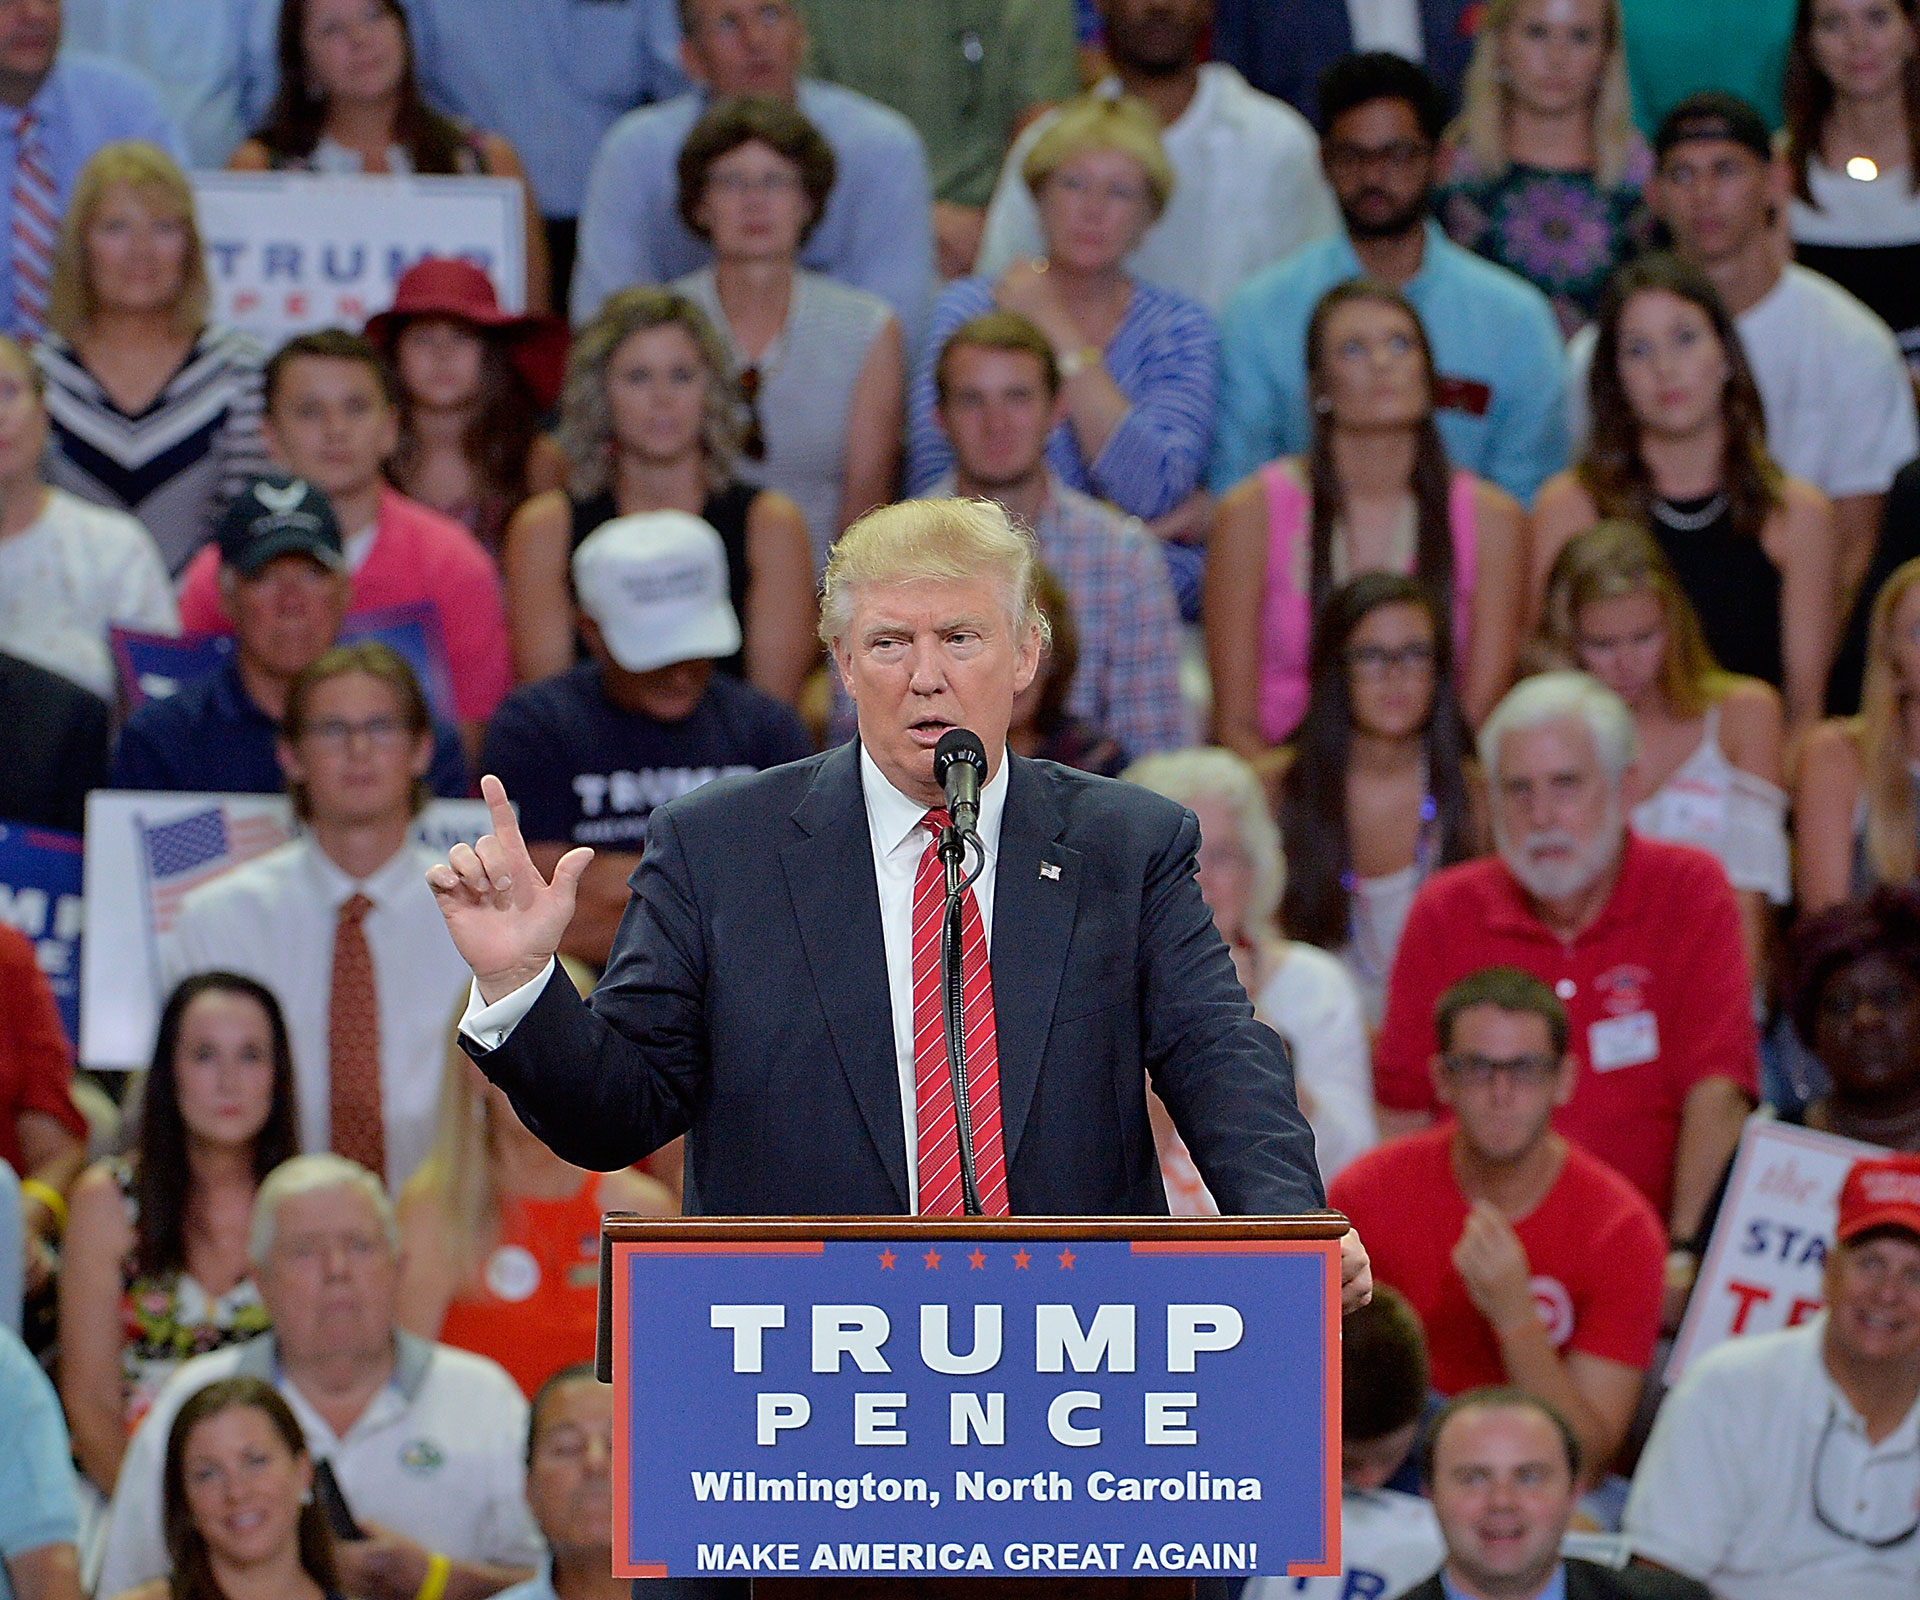 Did Donald Trump just hint at getting his supporters to shoot Hillary Clinton?